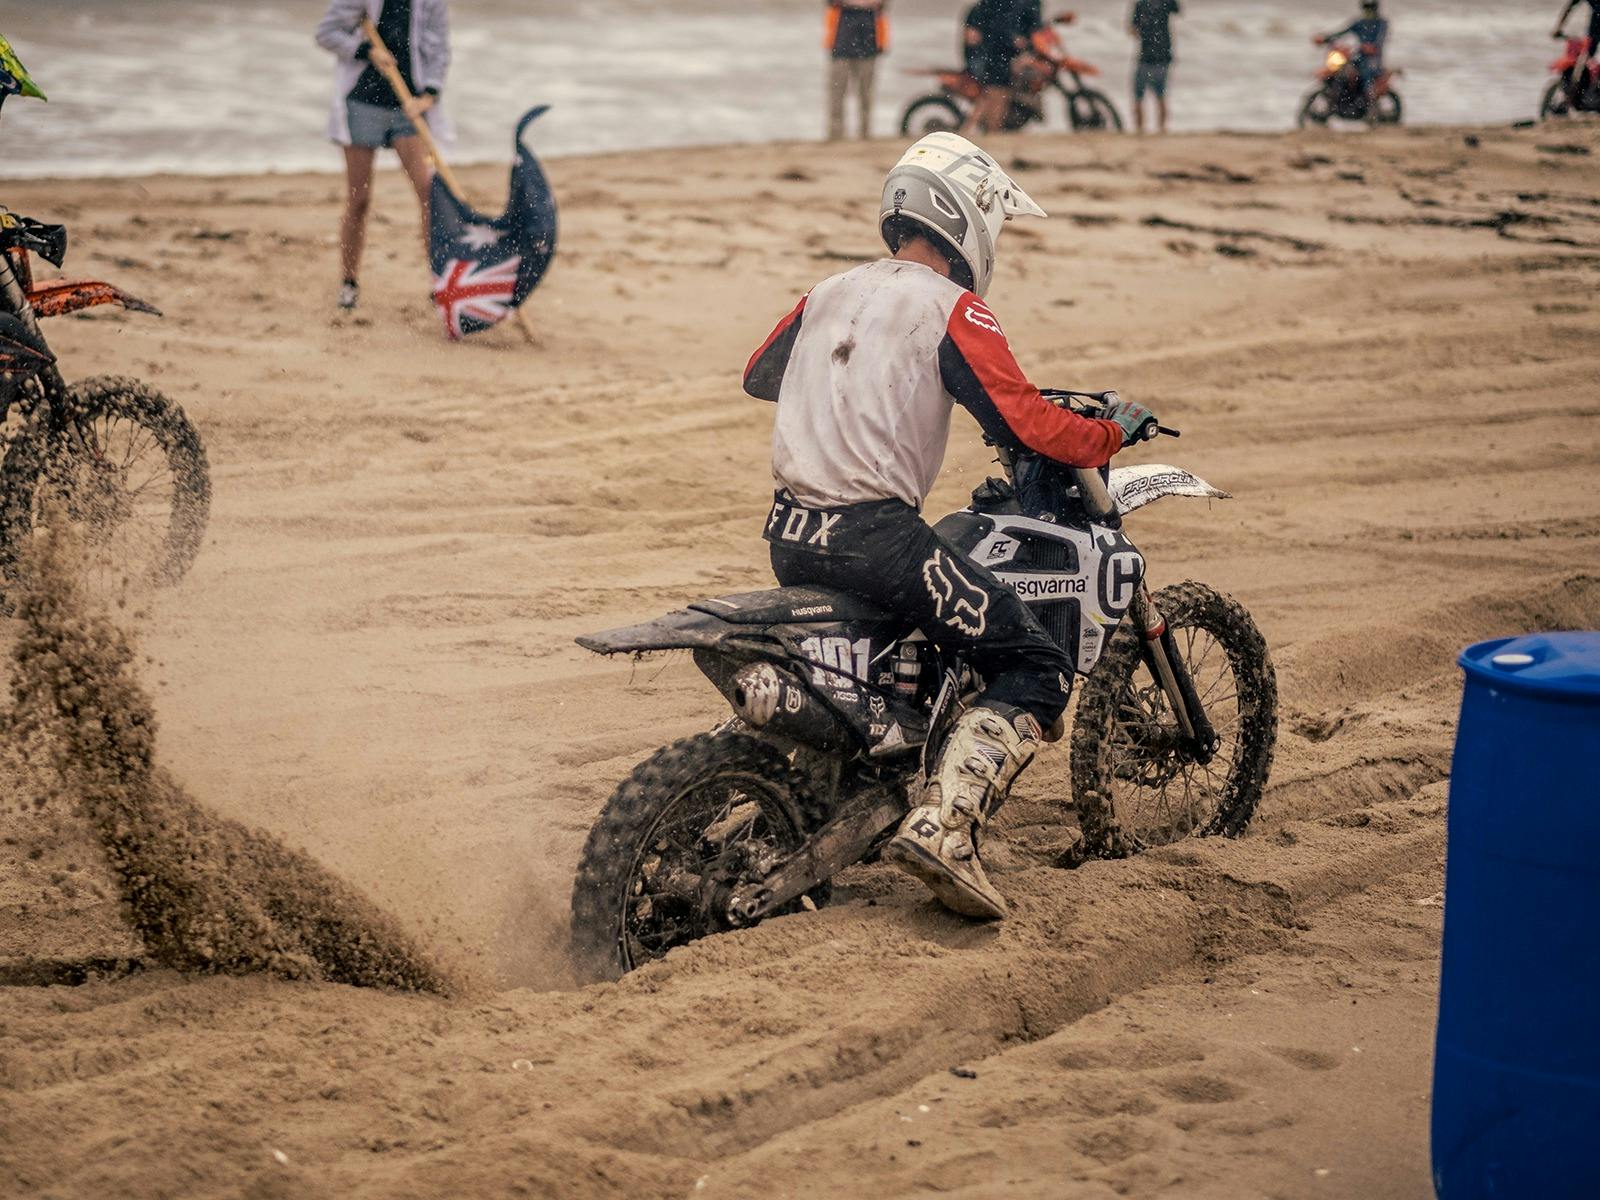 The beach race was held on a private beach and was a massive hit.